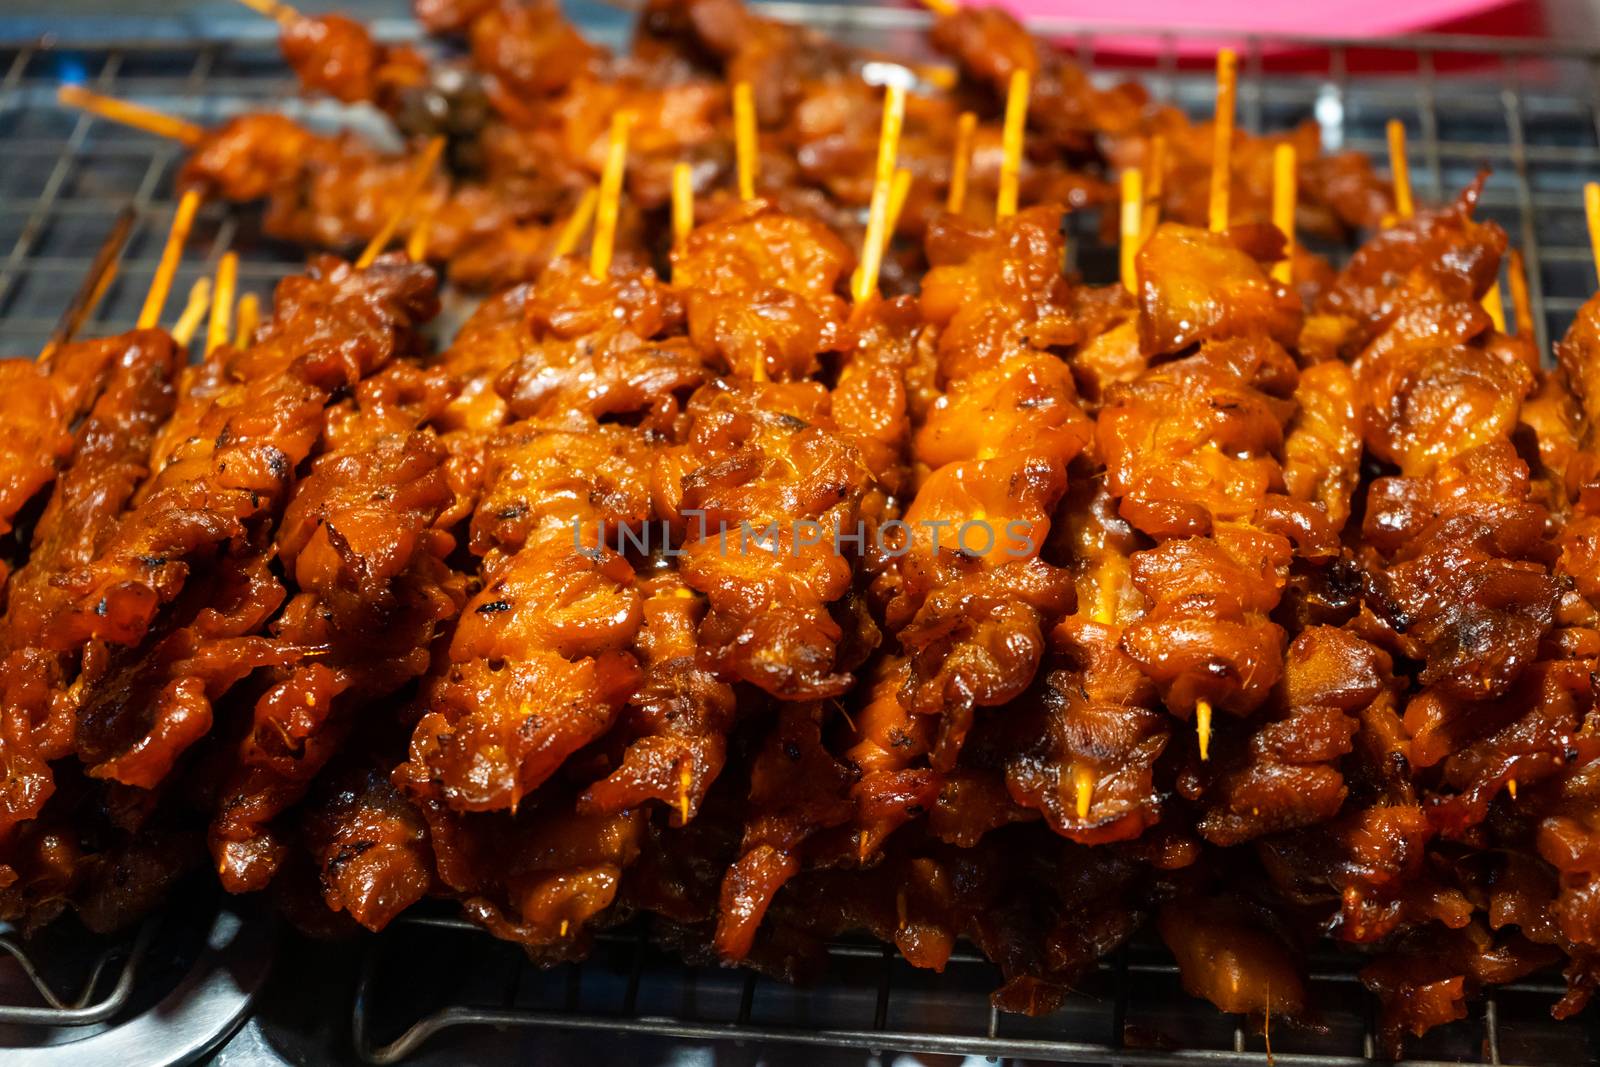 Asian food. A counter with mini kebabs of chicken skin and meat at a nightly street food market